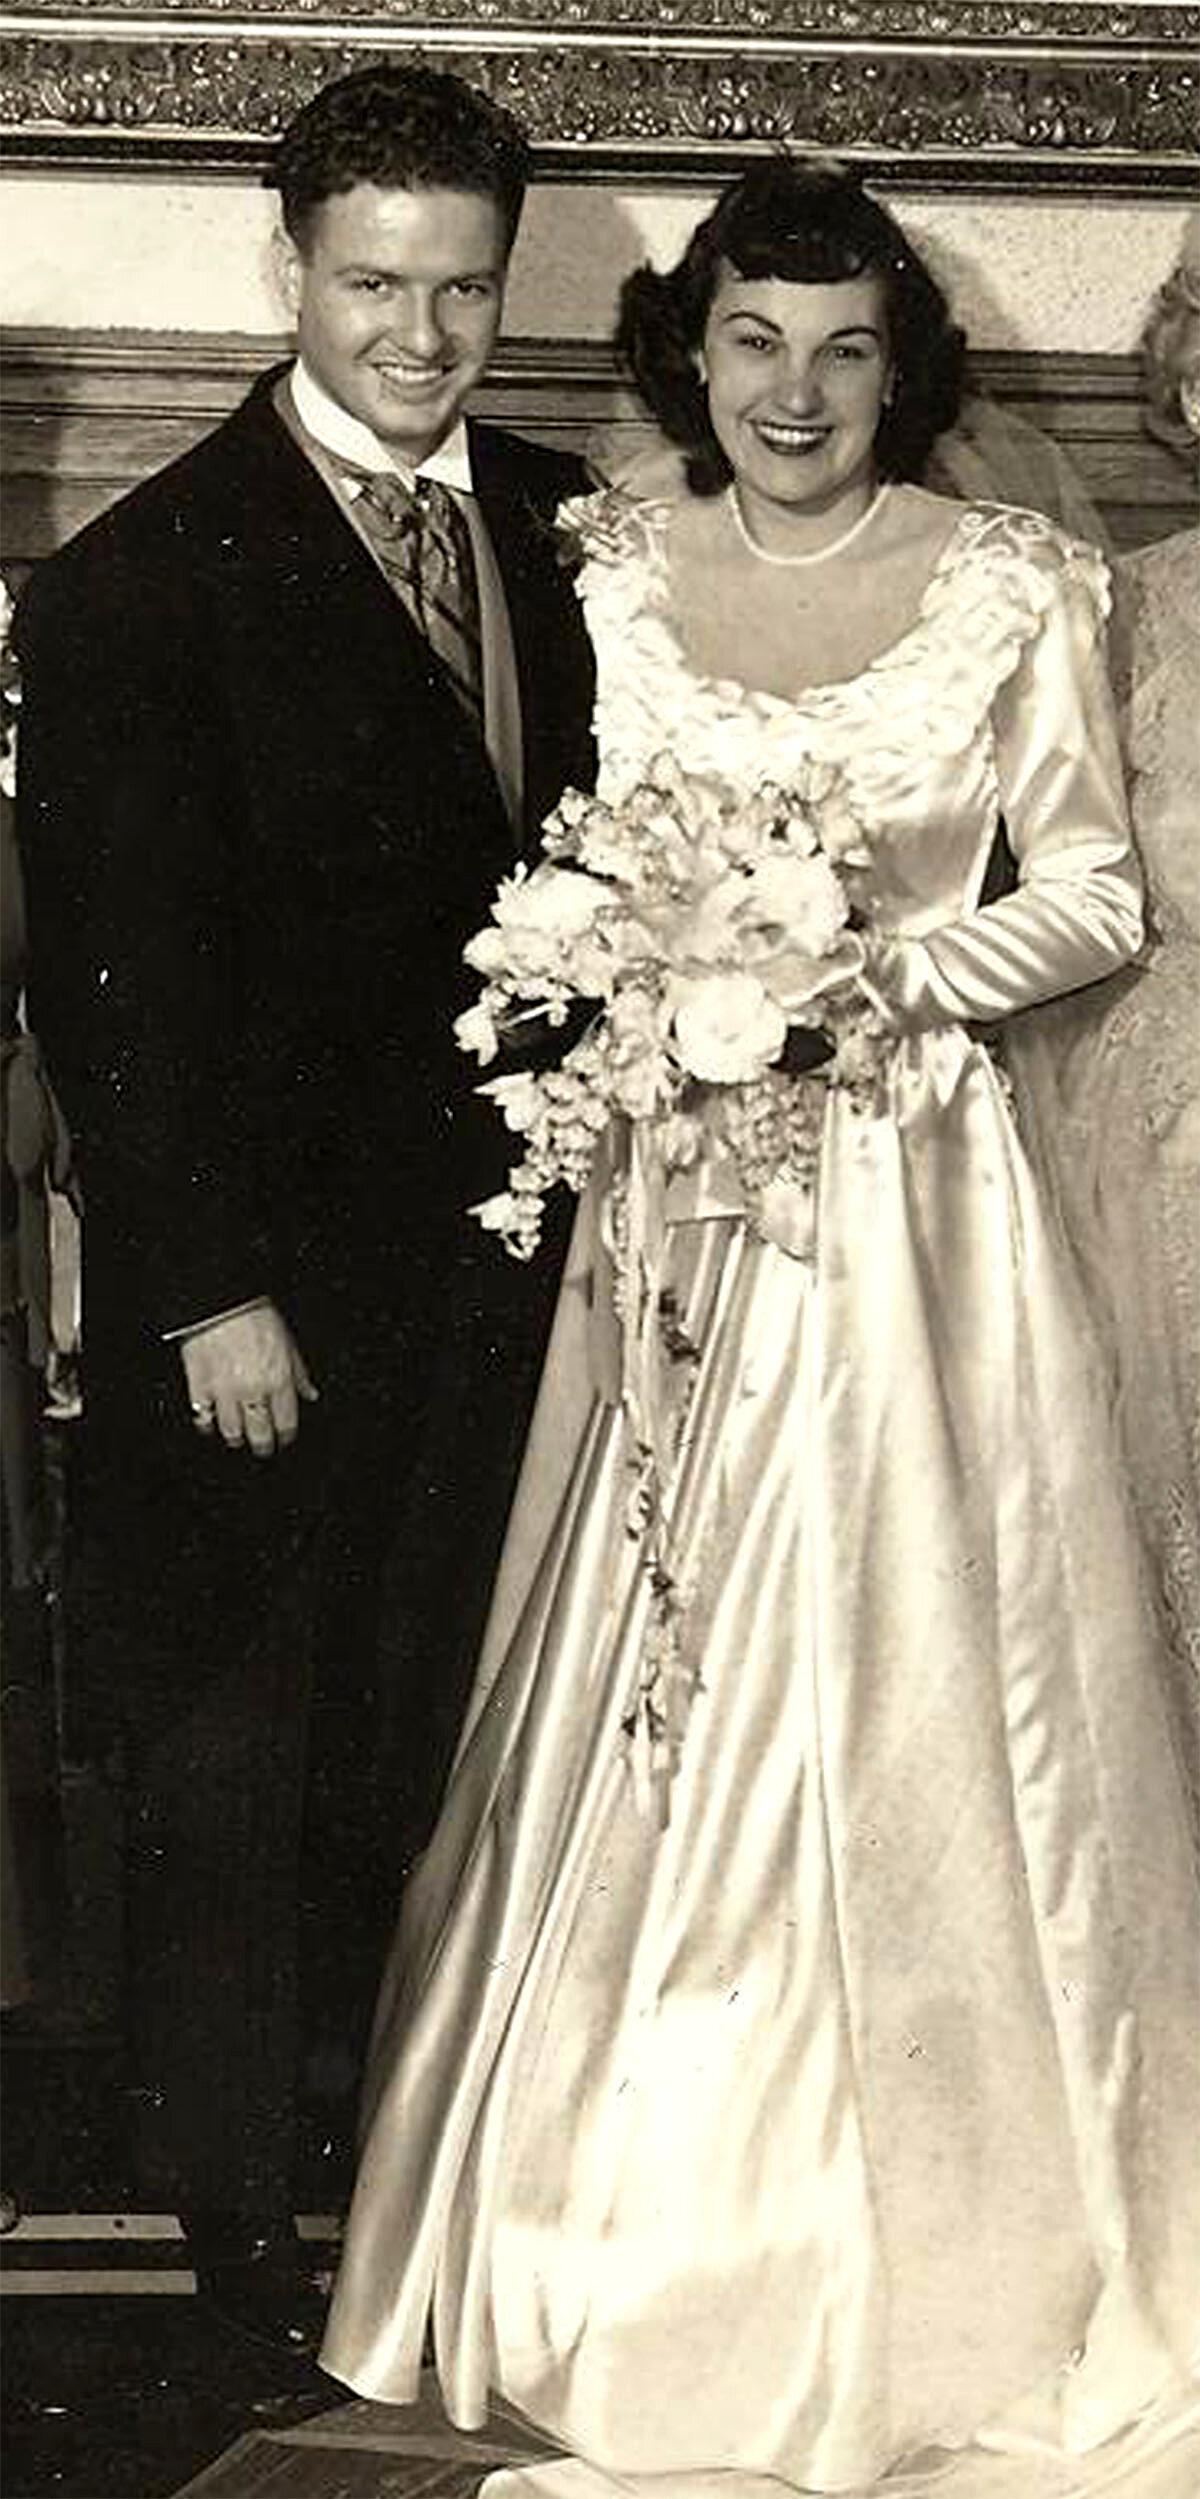 Jeanne and Jack on their wedding day, 1949